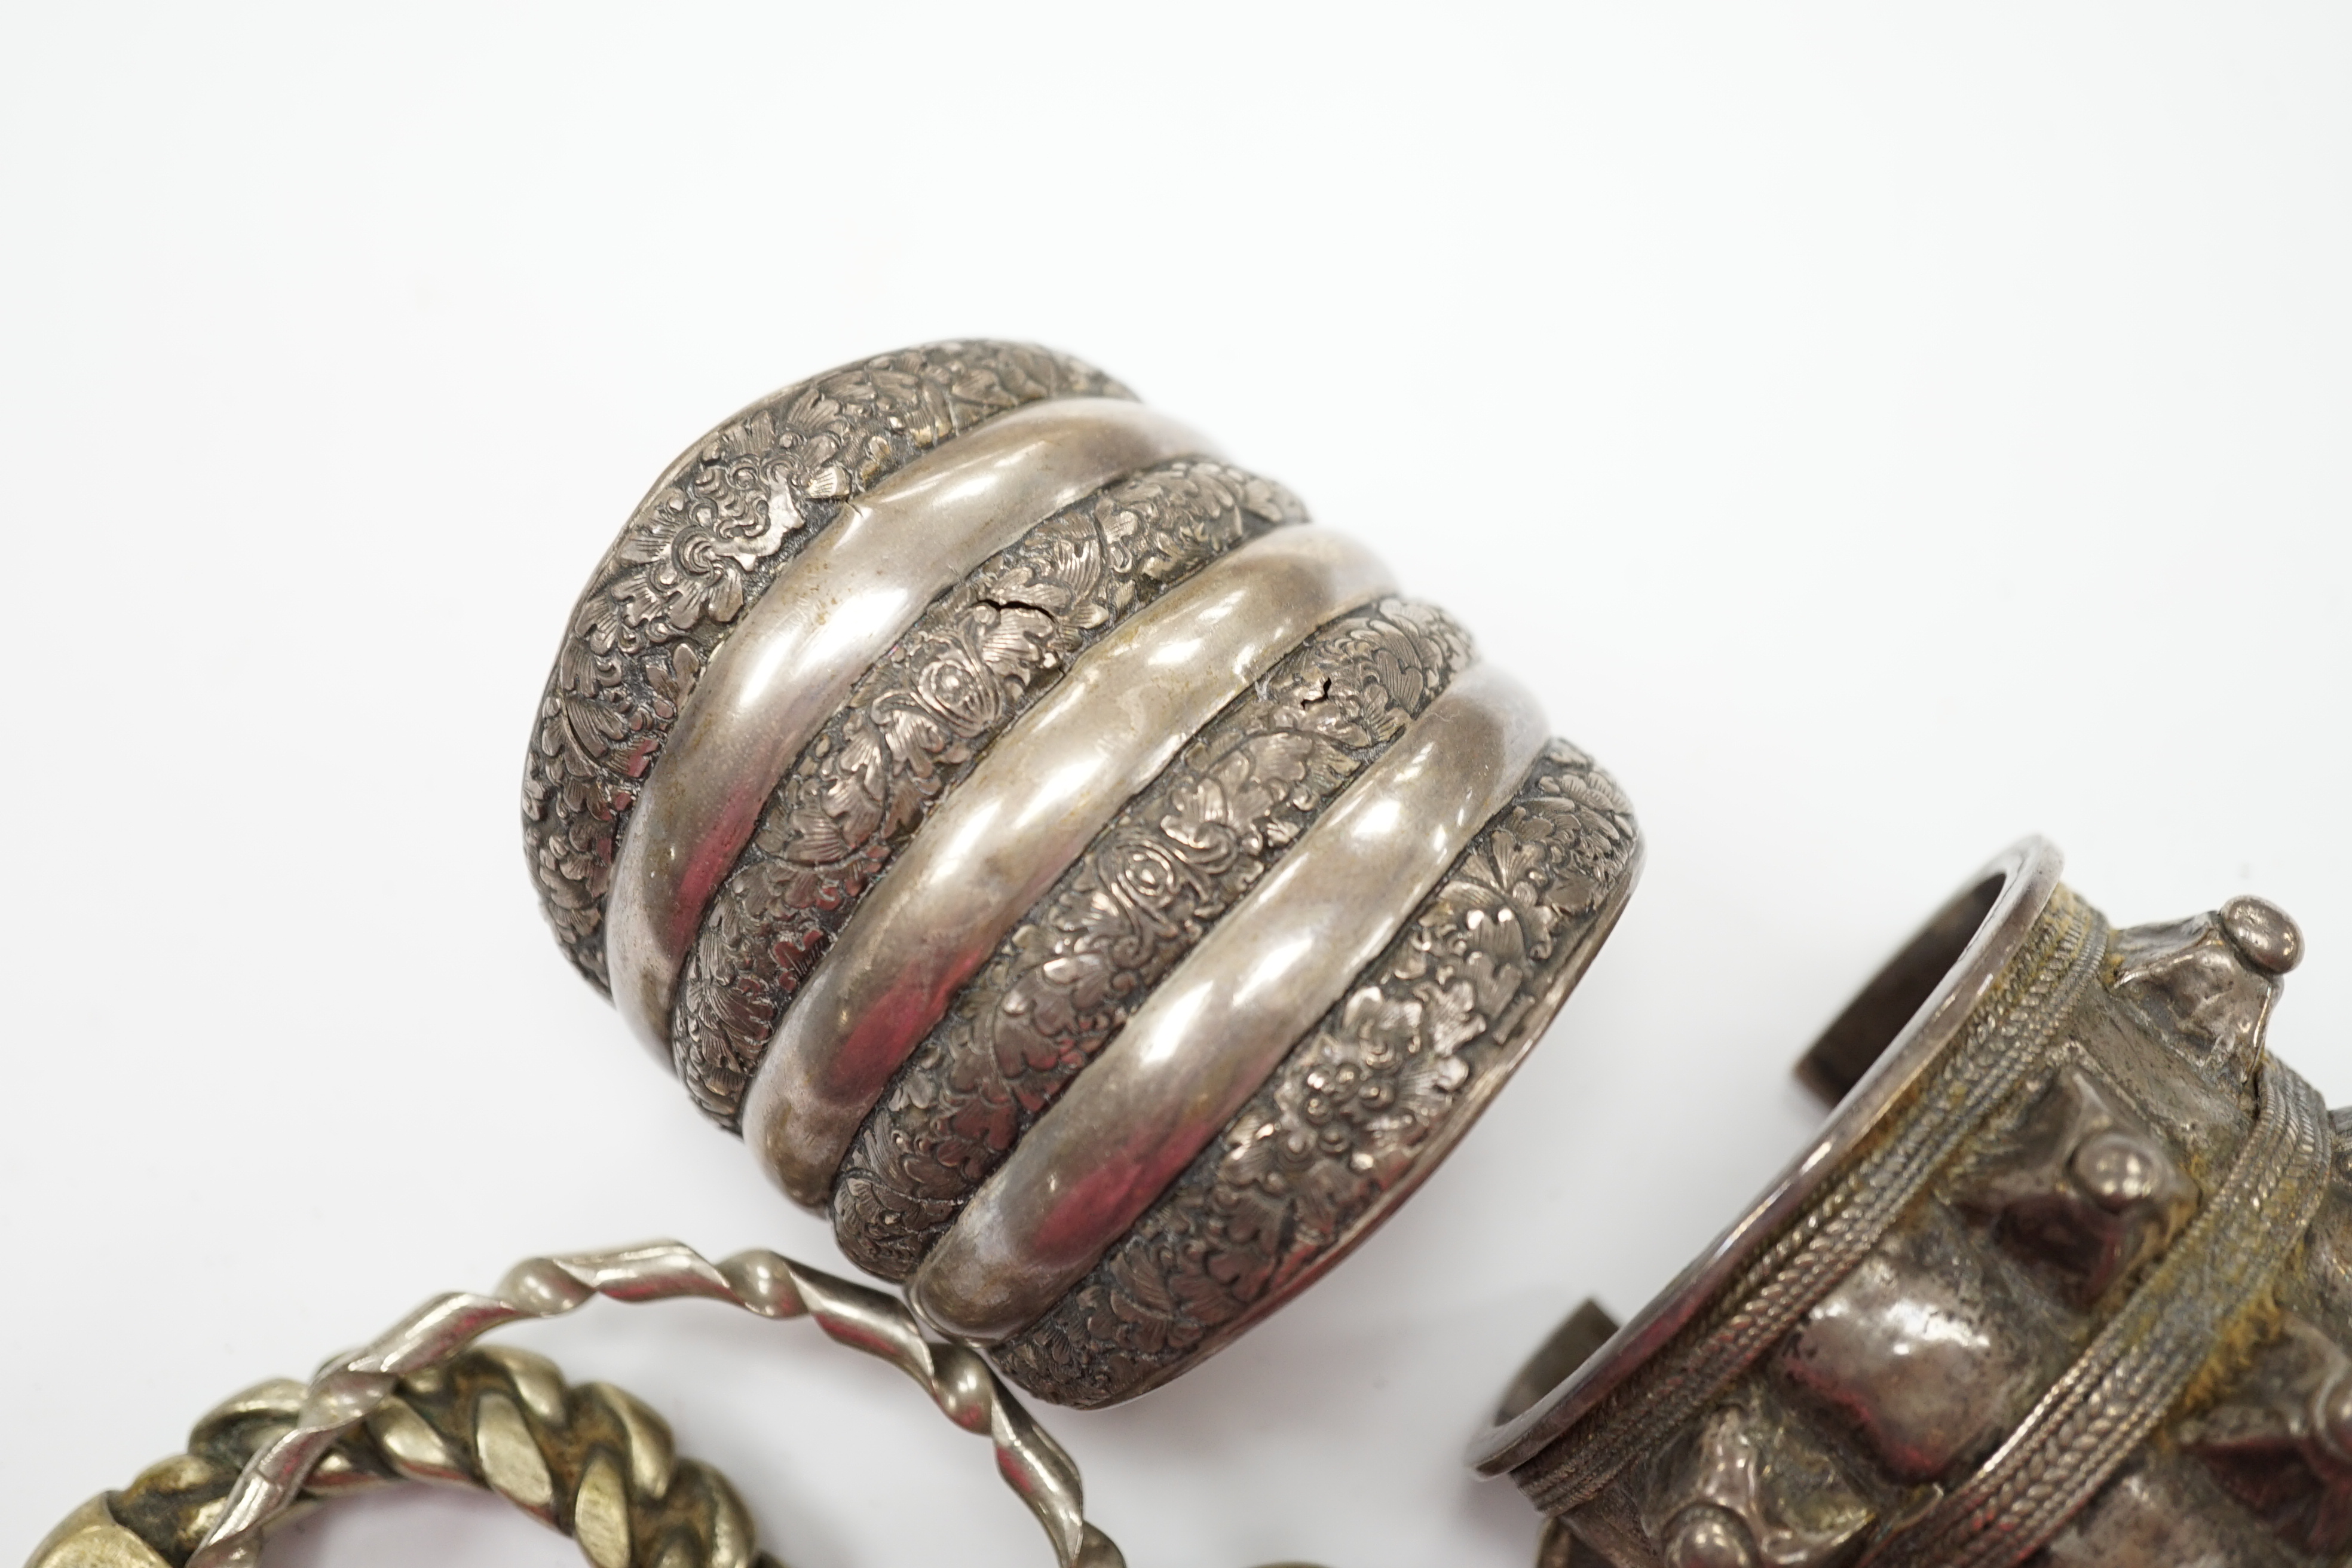 Six assorted Egyptian bracelets, including white metal bangles and two white metal cuff bracelets. Fair condition.